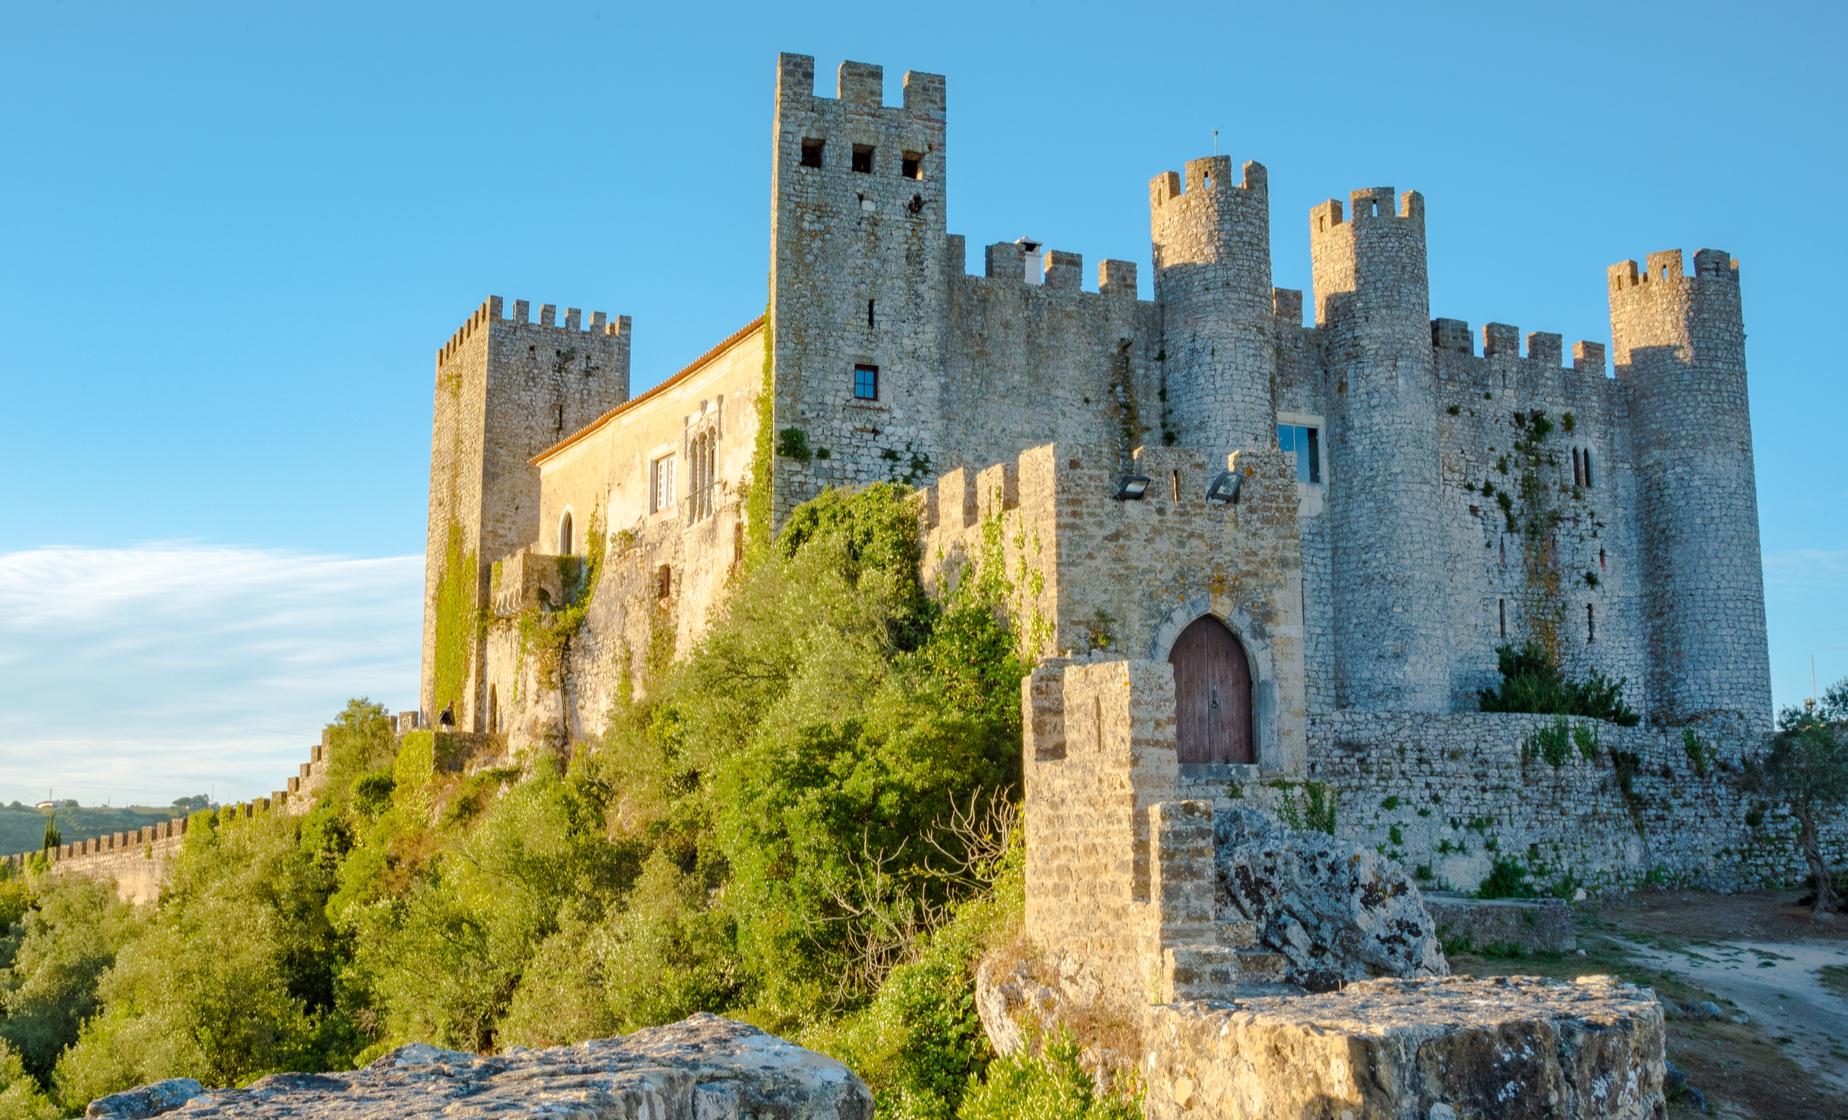 Full Day Tour to Obidos, Alcobaca, Batalha, Nazare and Fatima from Lisbon